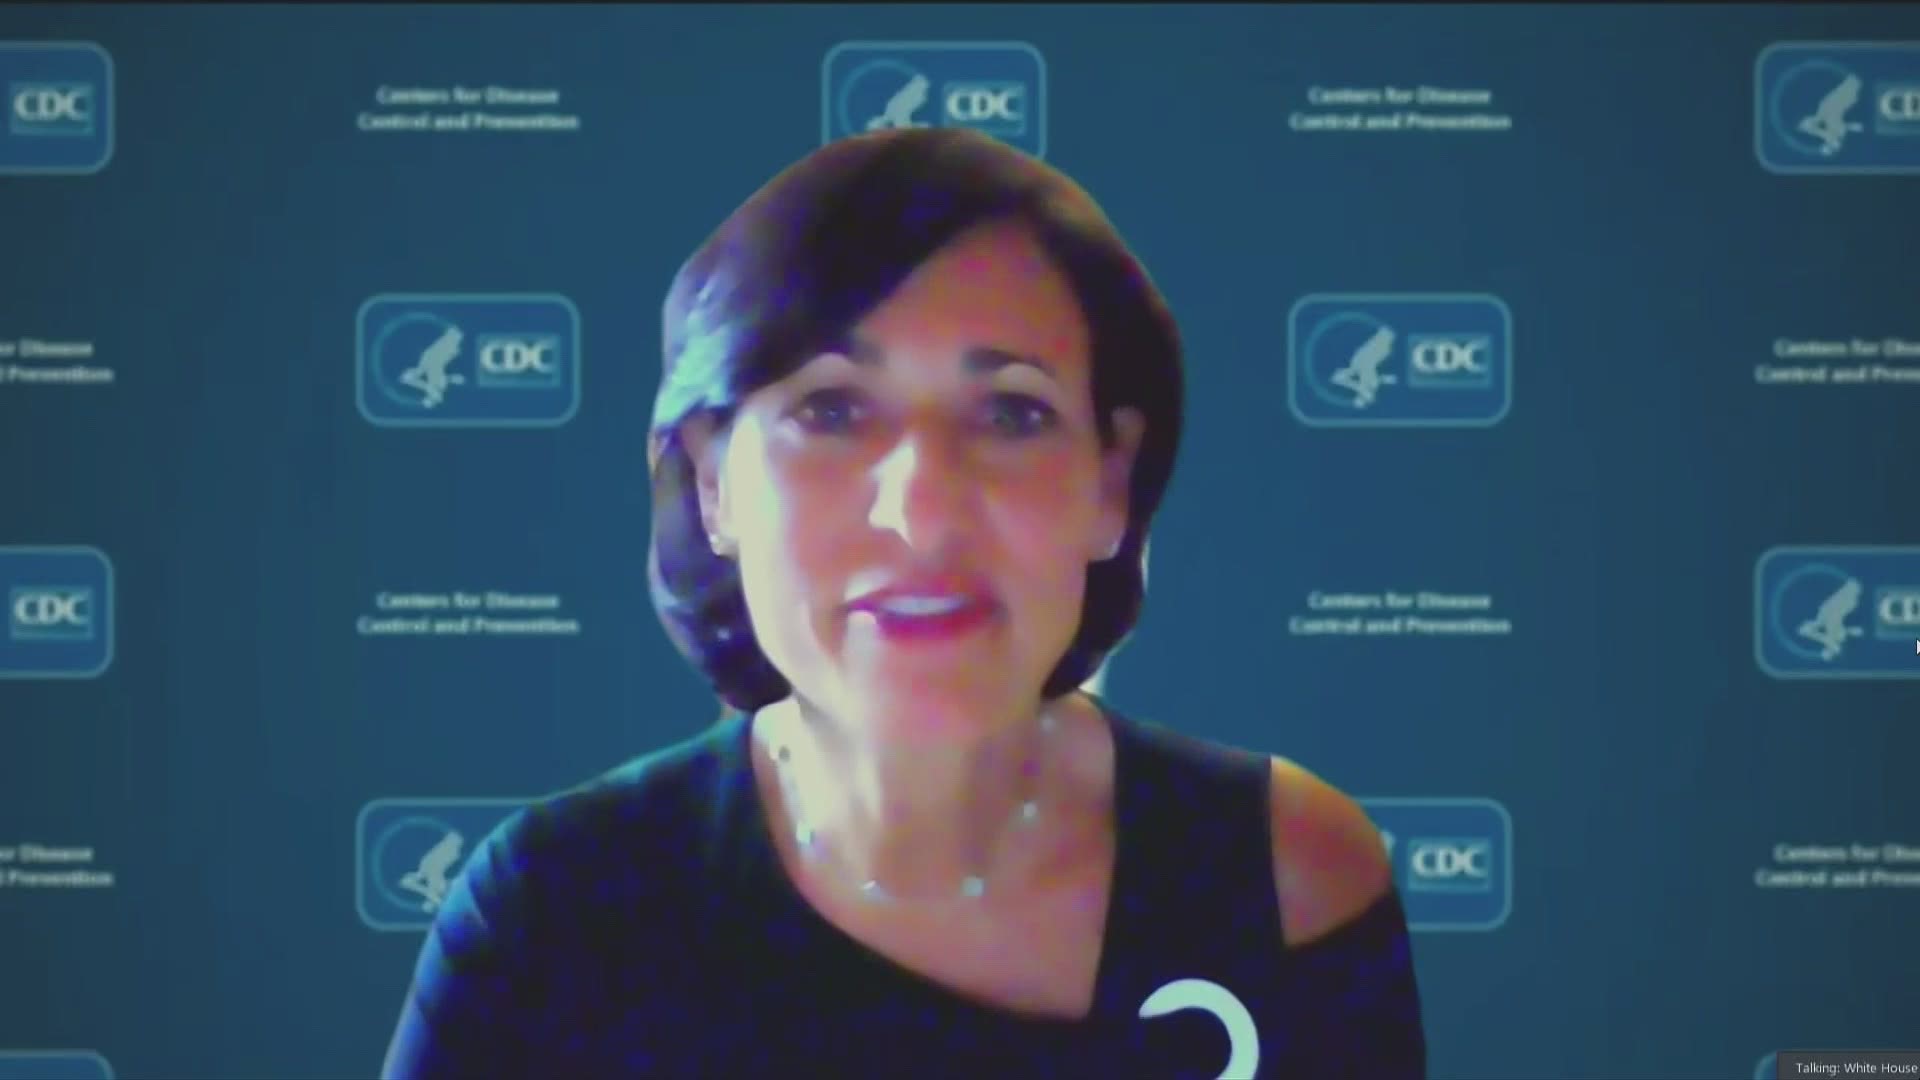 CDC Director addresses COVID-19 vaccine rates and the delta variant that has become dominant in the United States.